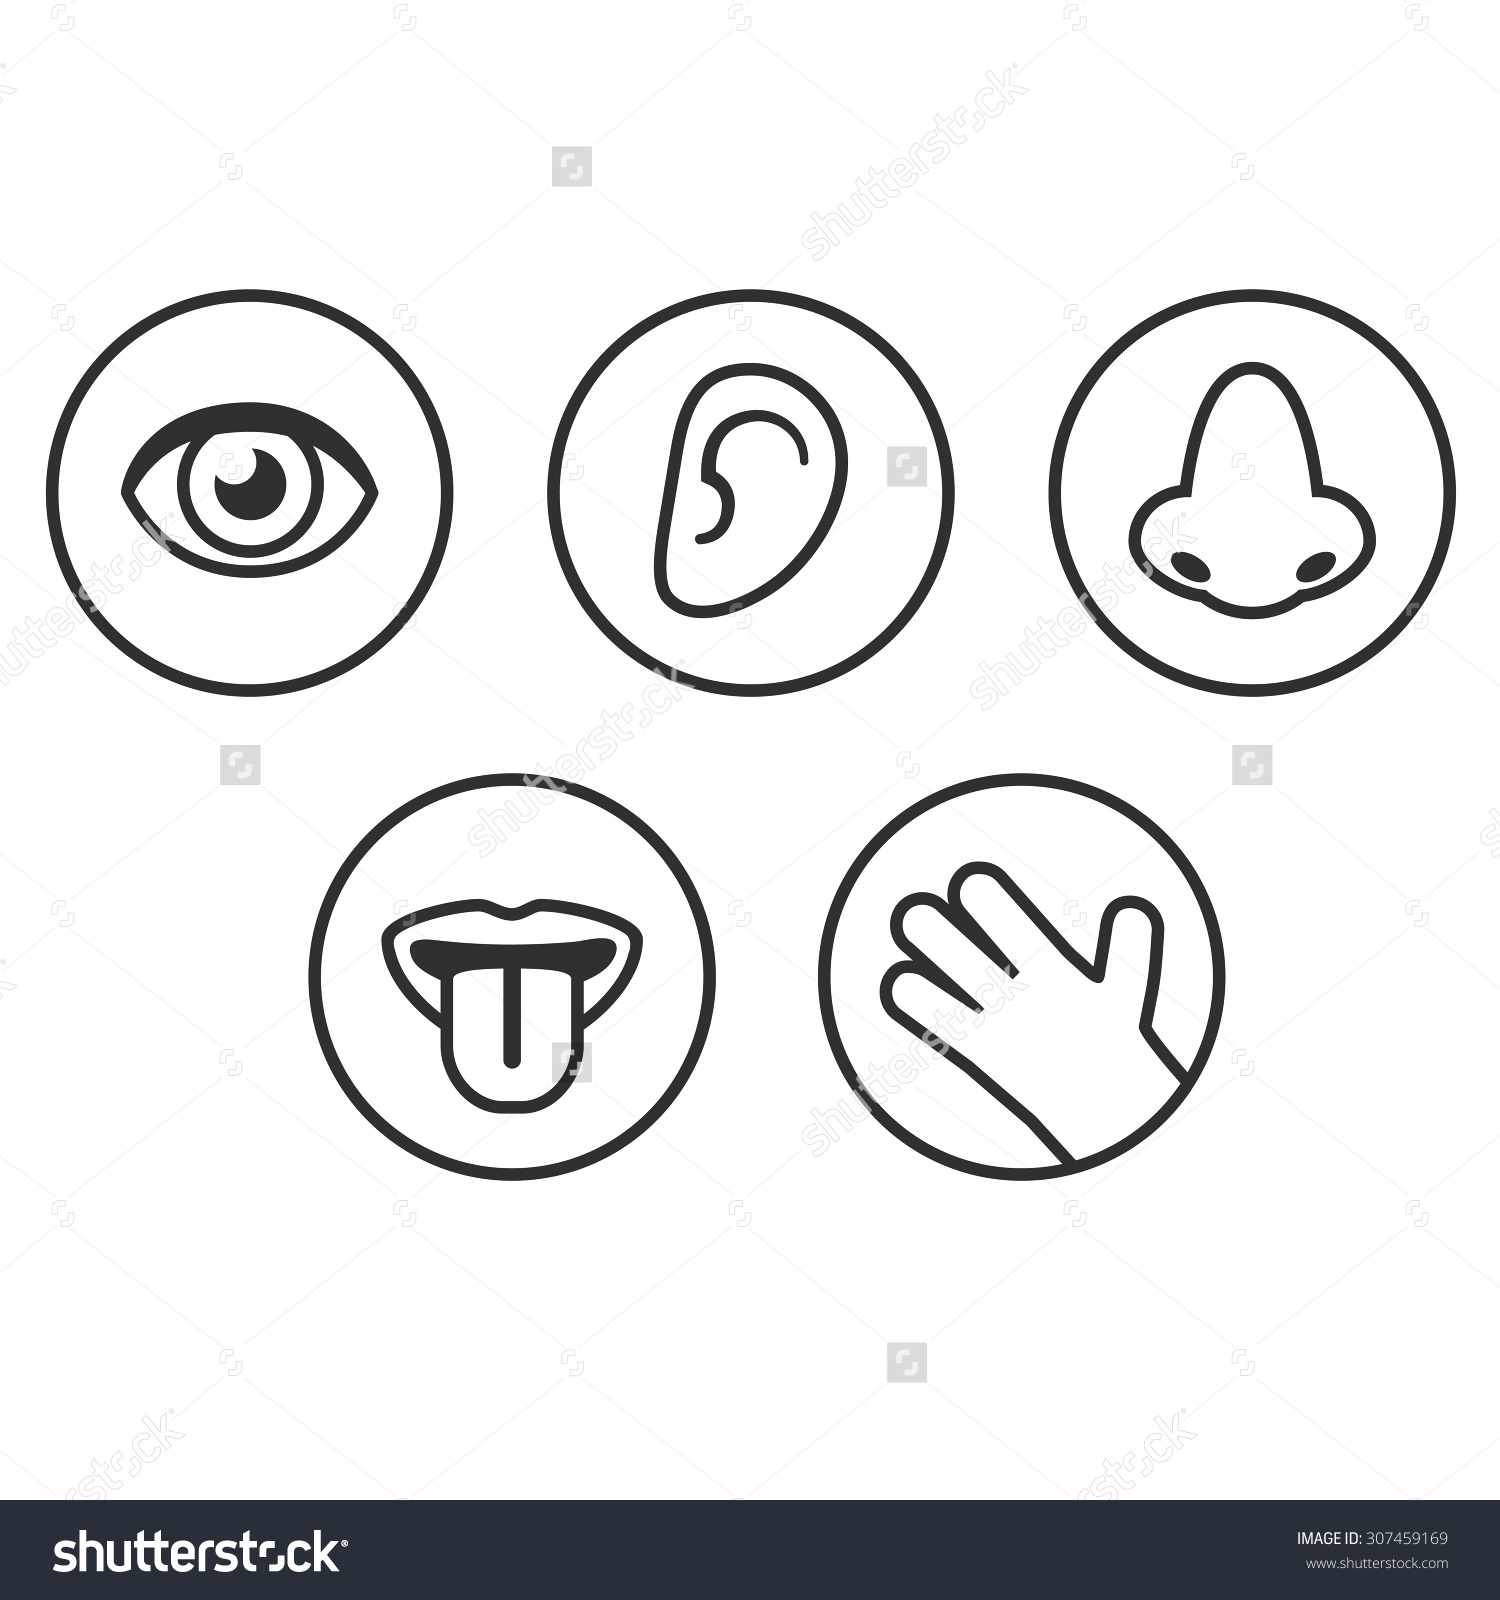 Clipart Five Senses. Save to a lightbox